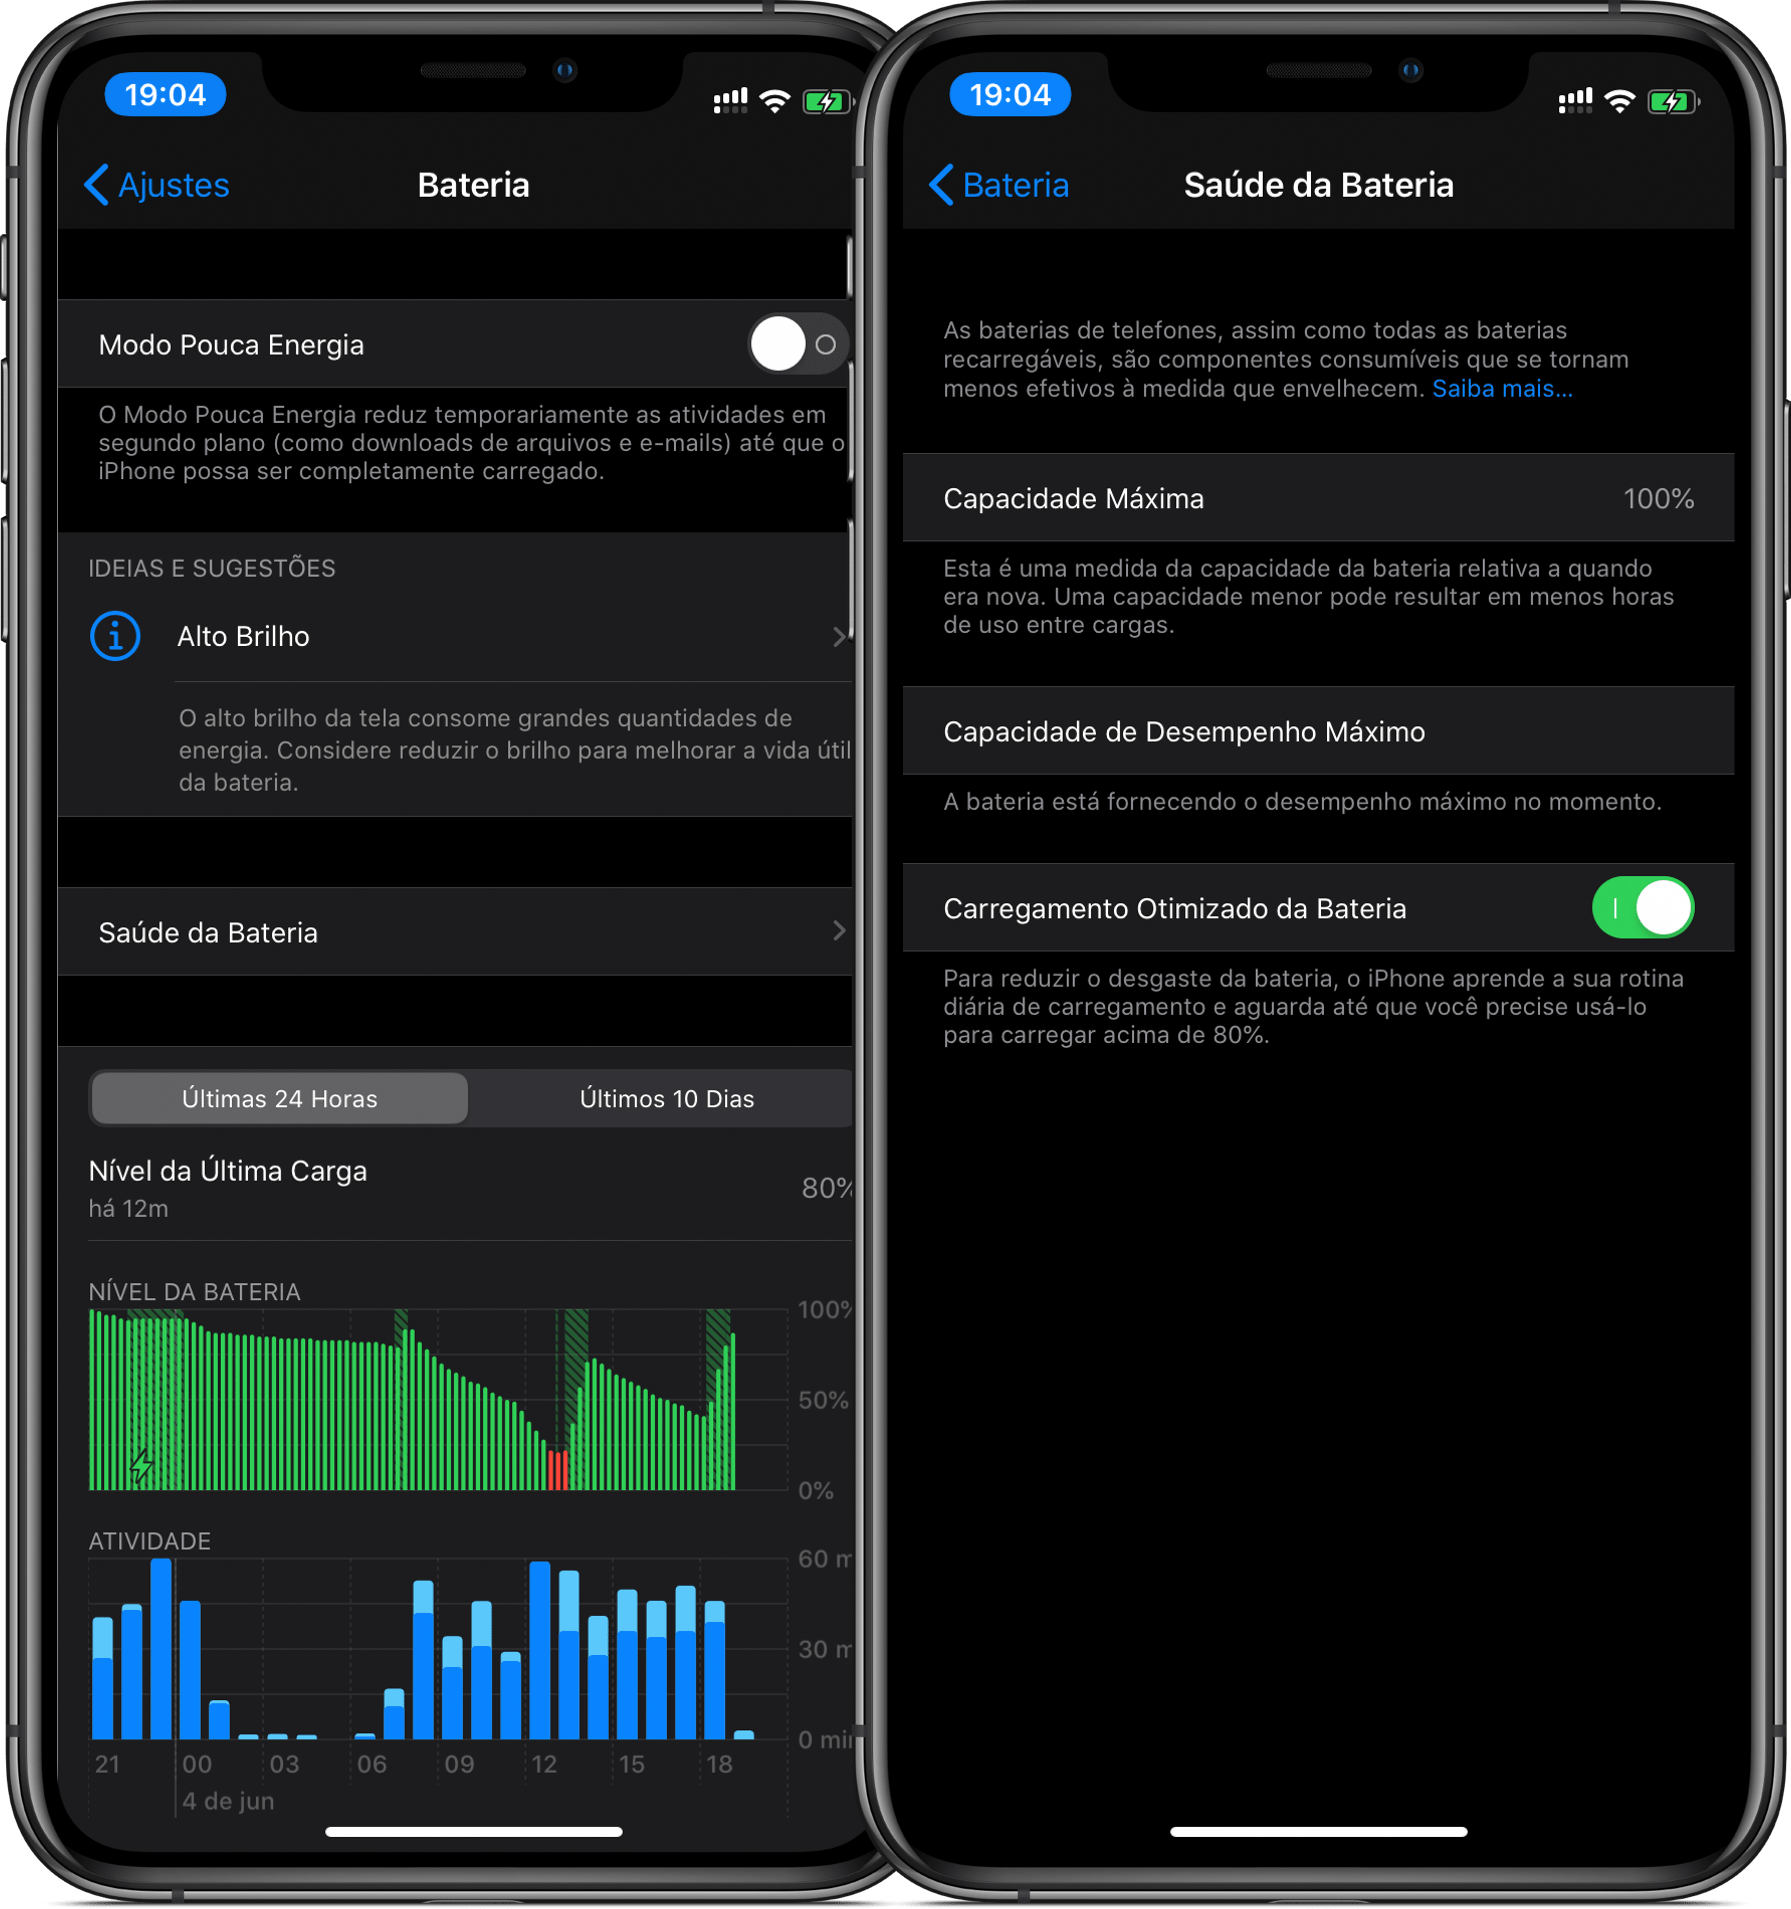 IOS 13 Optimized Battery Charging Feature